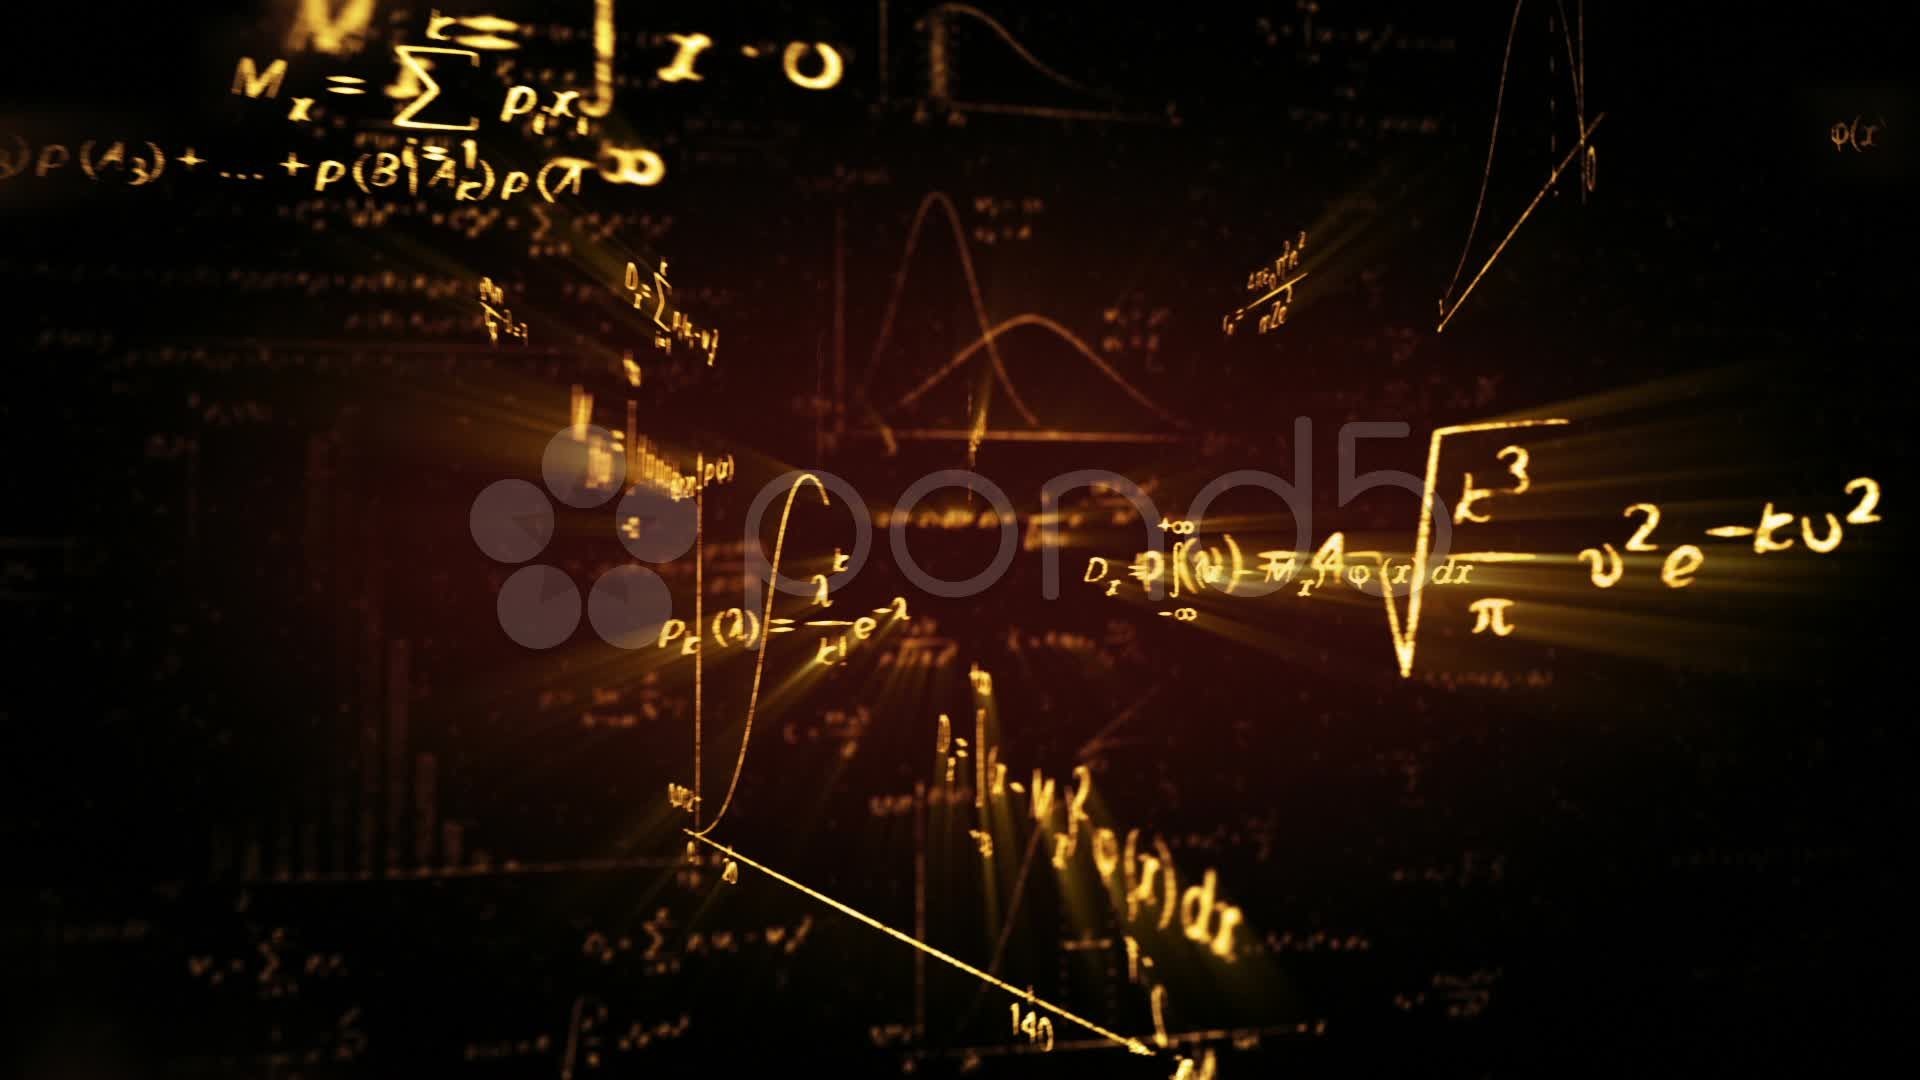 1920x1080, Equation, Physics, Chalkboards, Wallpapers, - Physics Equations - HD Wallpaper 